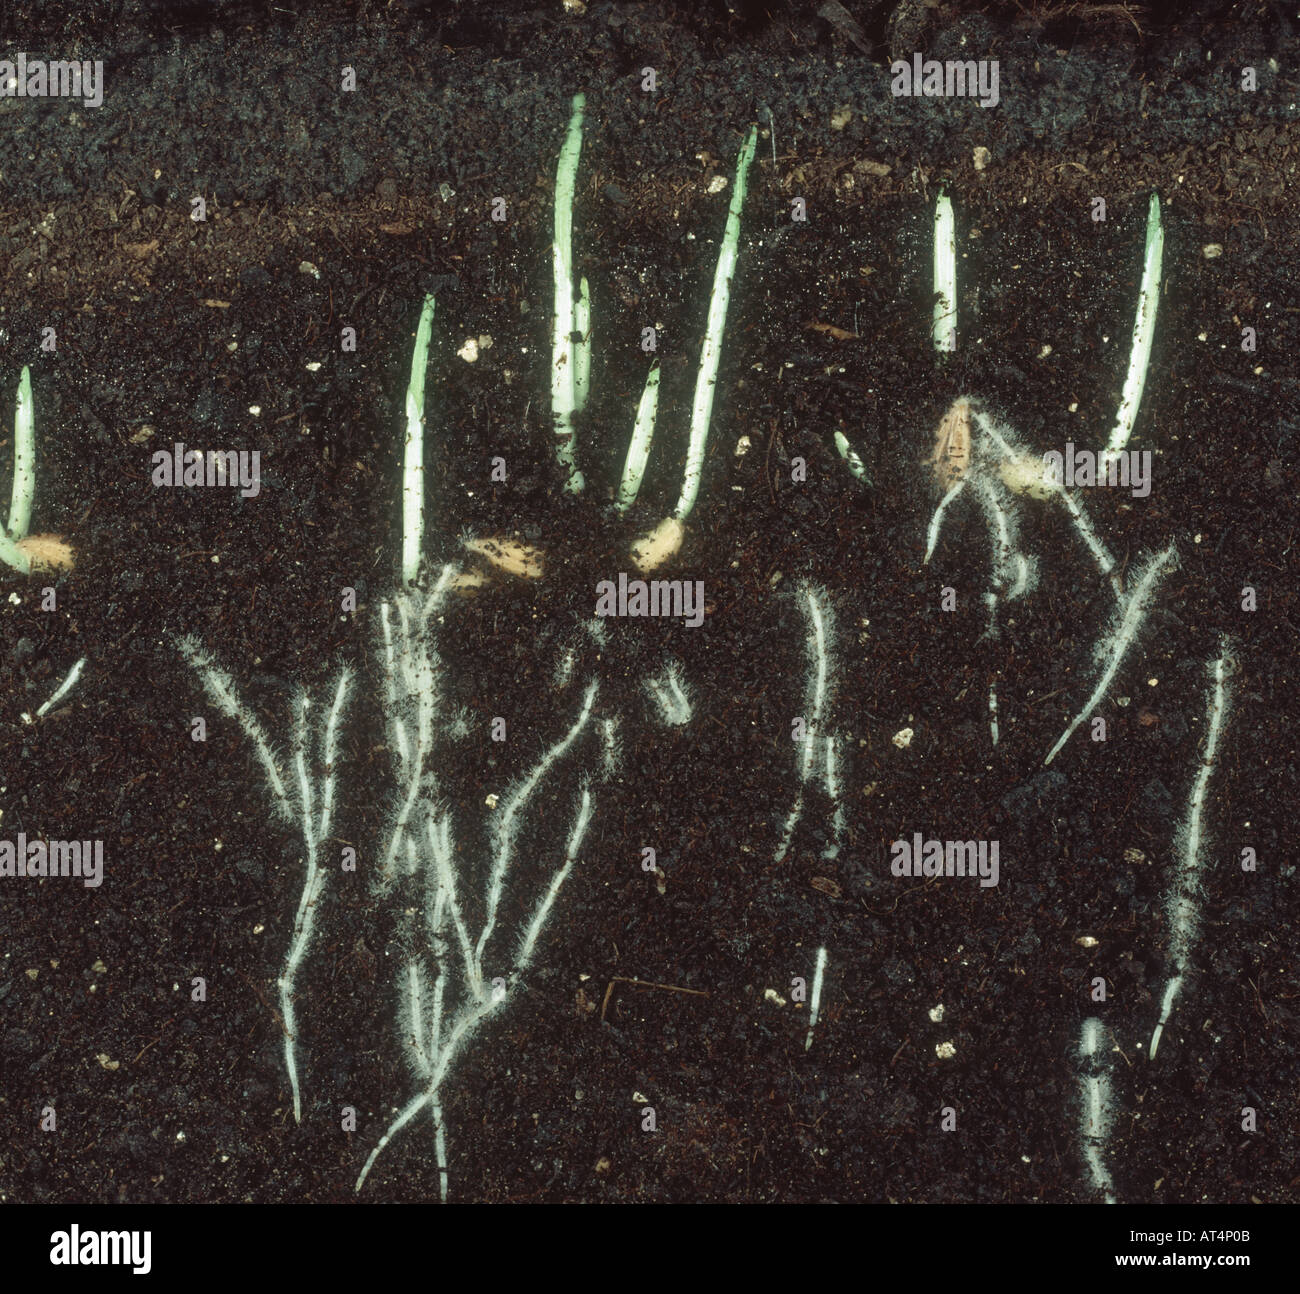 Germinating barley seeds showing root development as shoots begin to emerge Stock Photo